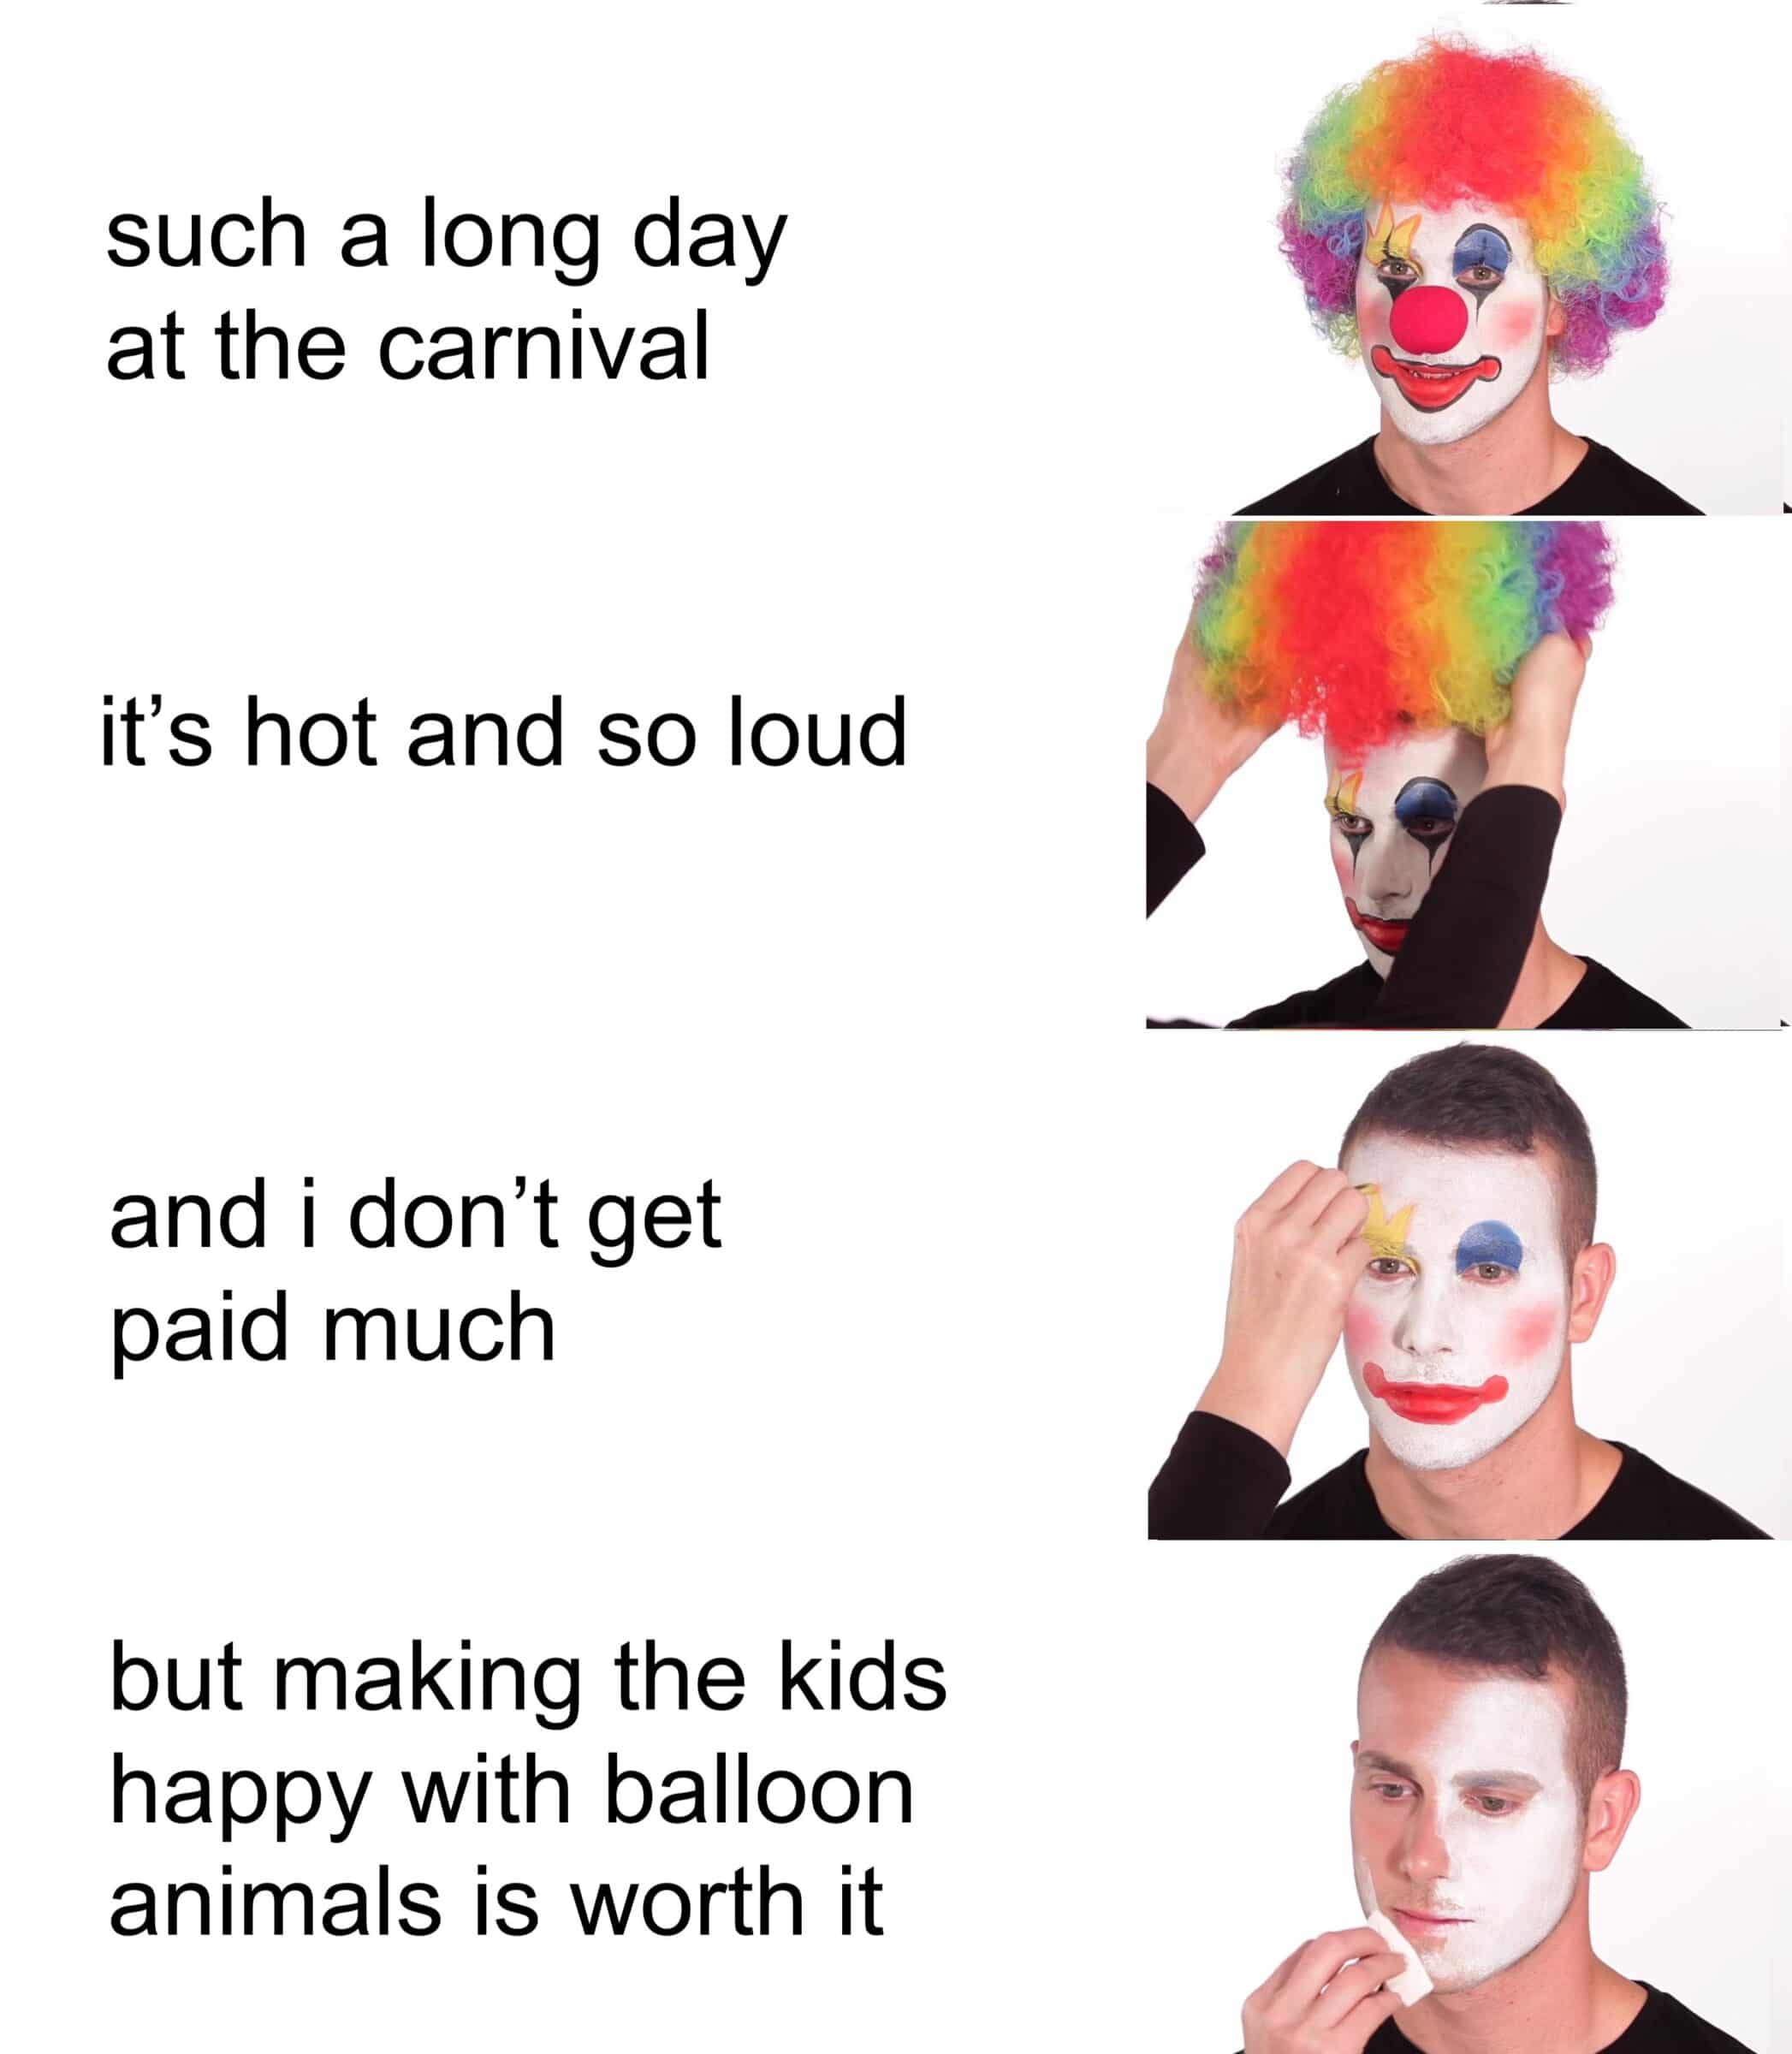 Funny, Joker other memes Funny, Joker text: such a long day at the carnival it's hot and so loud and i don't get paid much but making the kids happy with balloon animals is worth it 9 